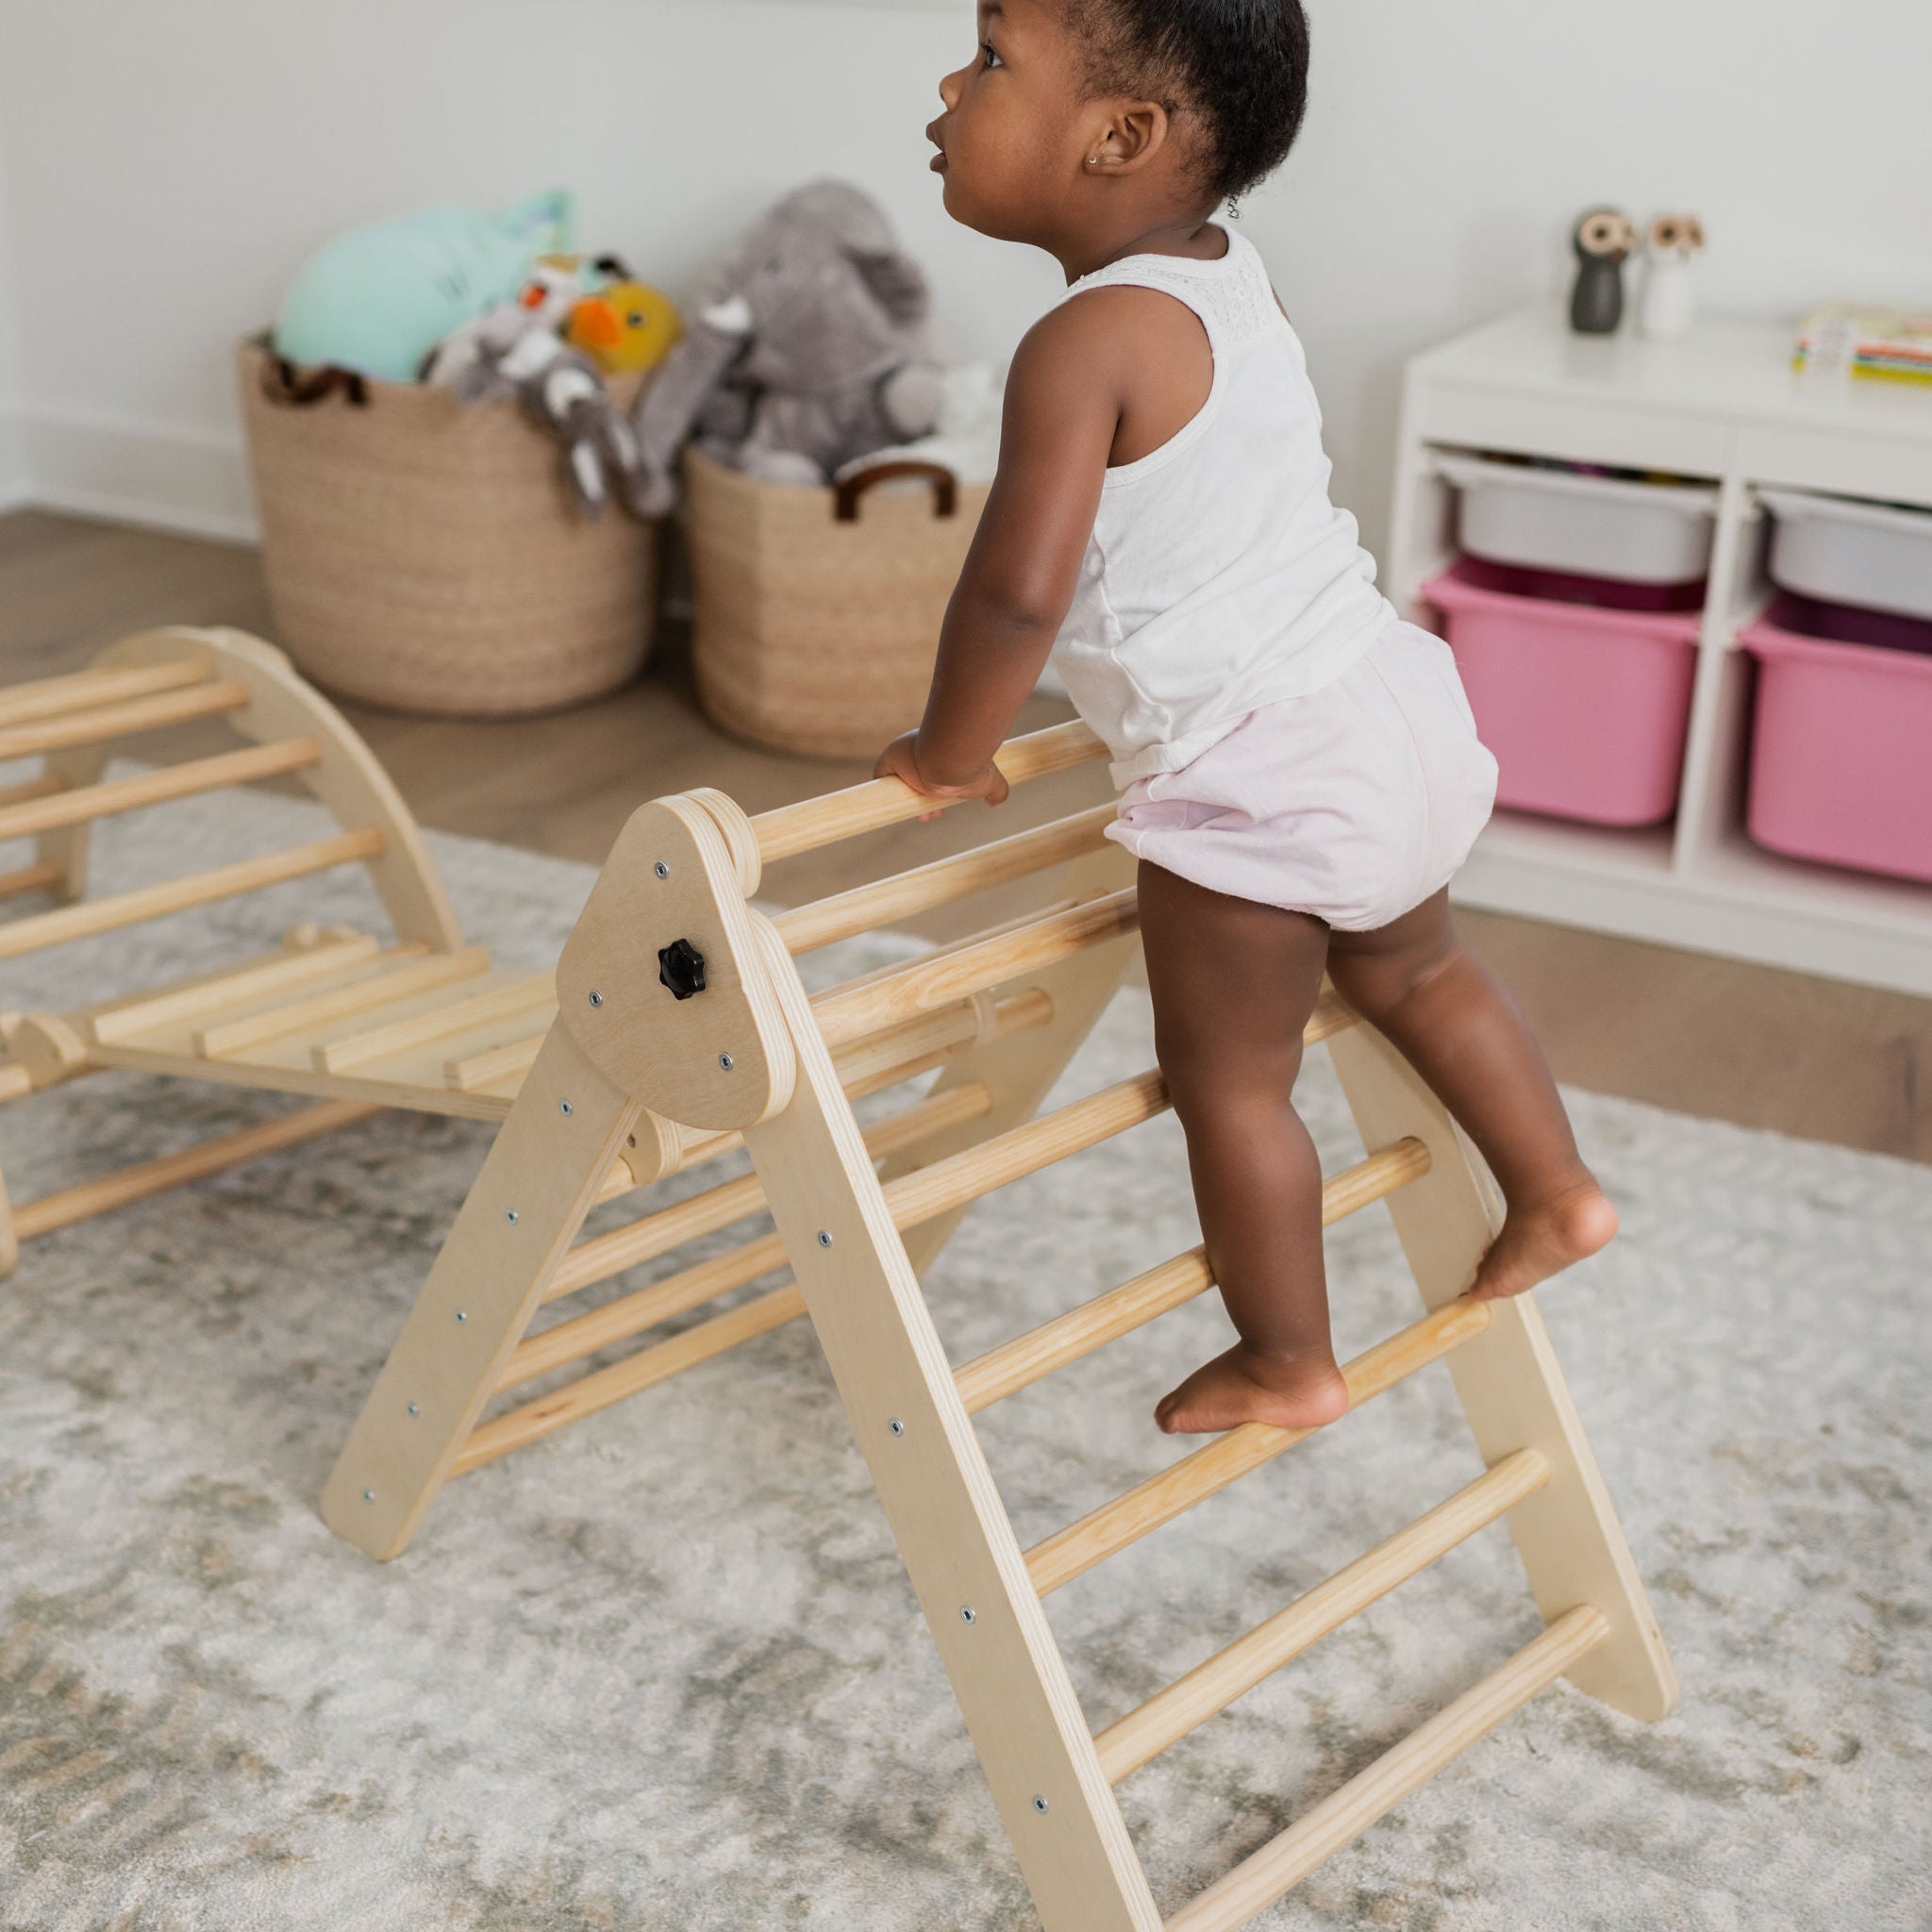 These Creative Gifts for Two-Year-Olds Will Keep Them Active, Learning, and Far From Terrible